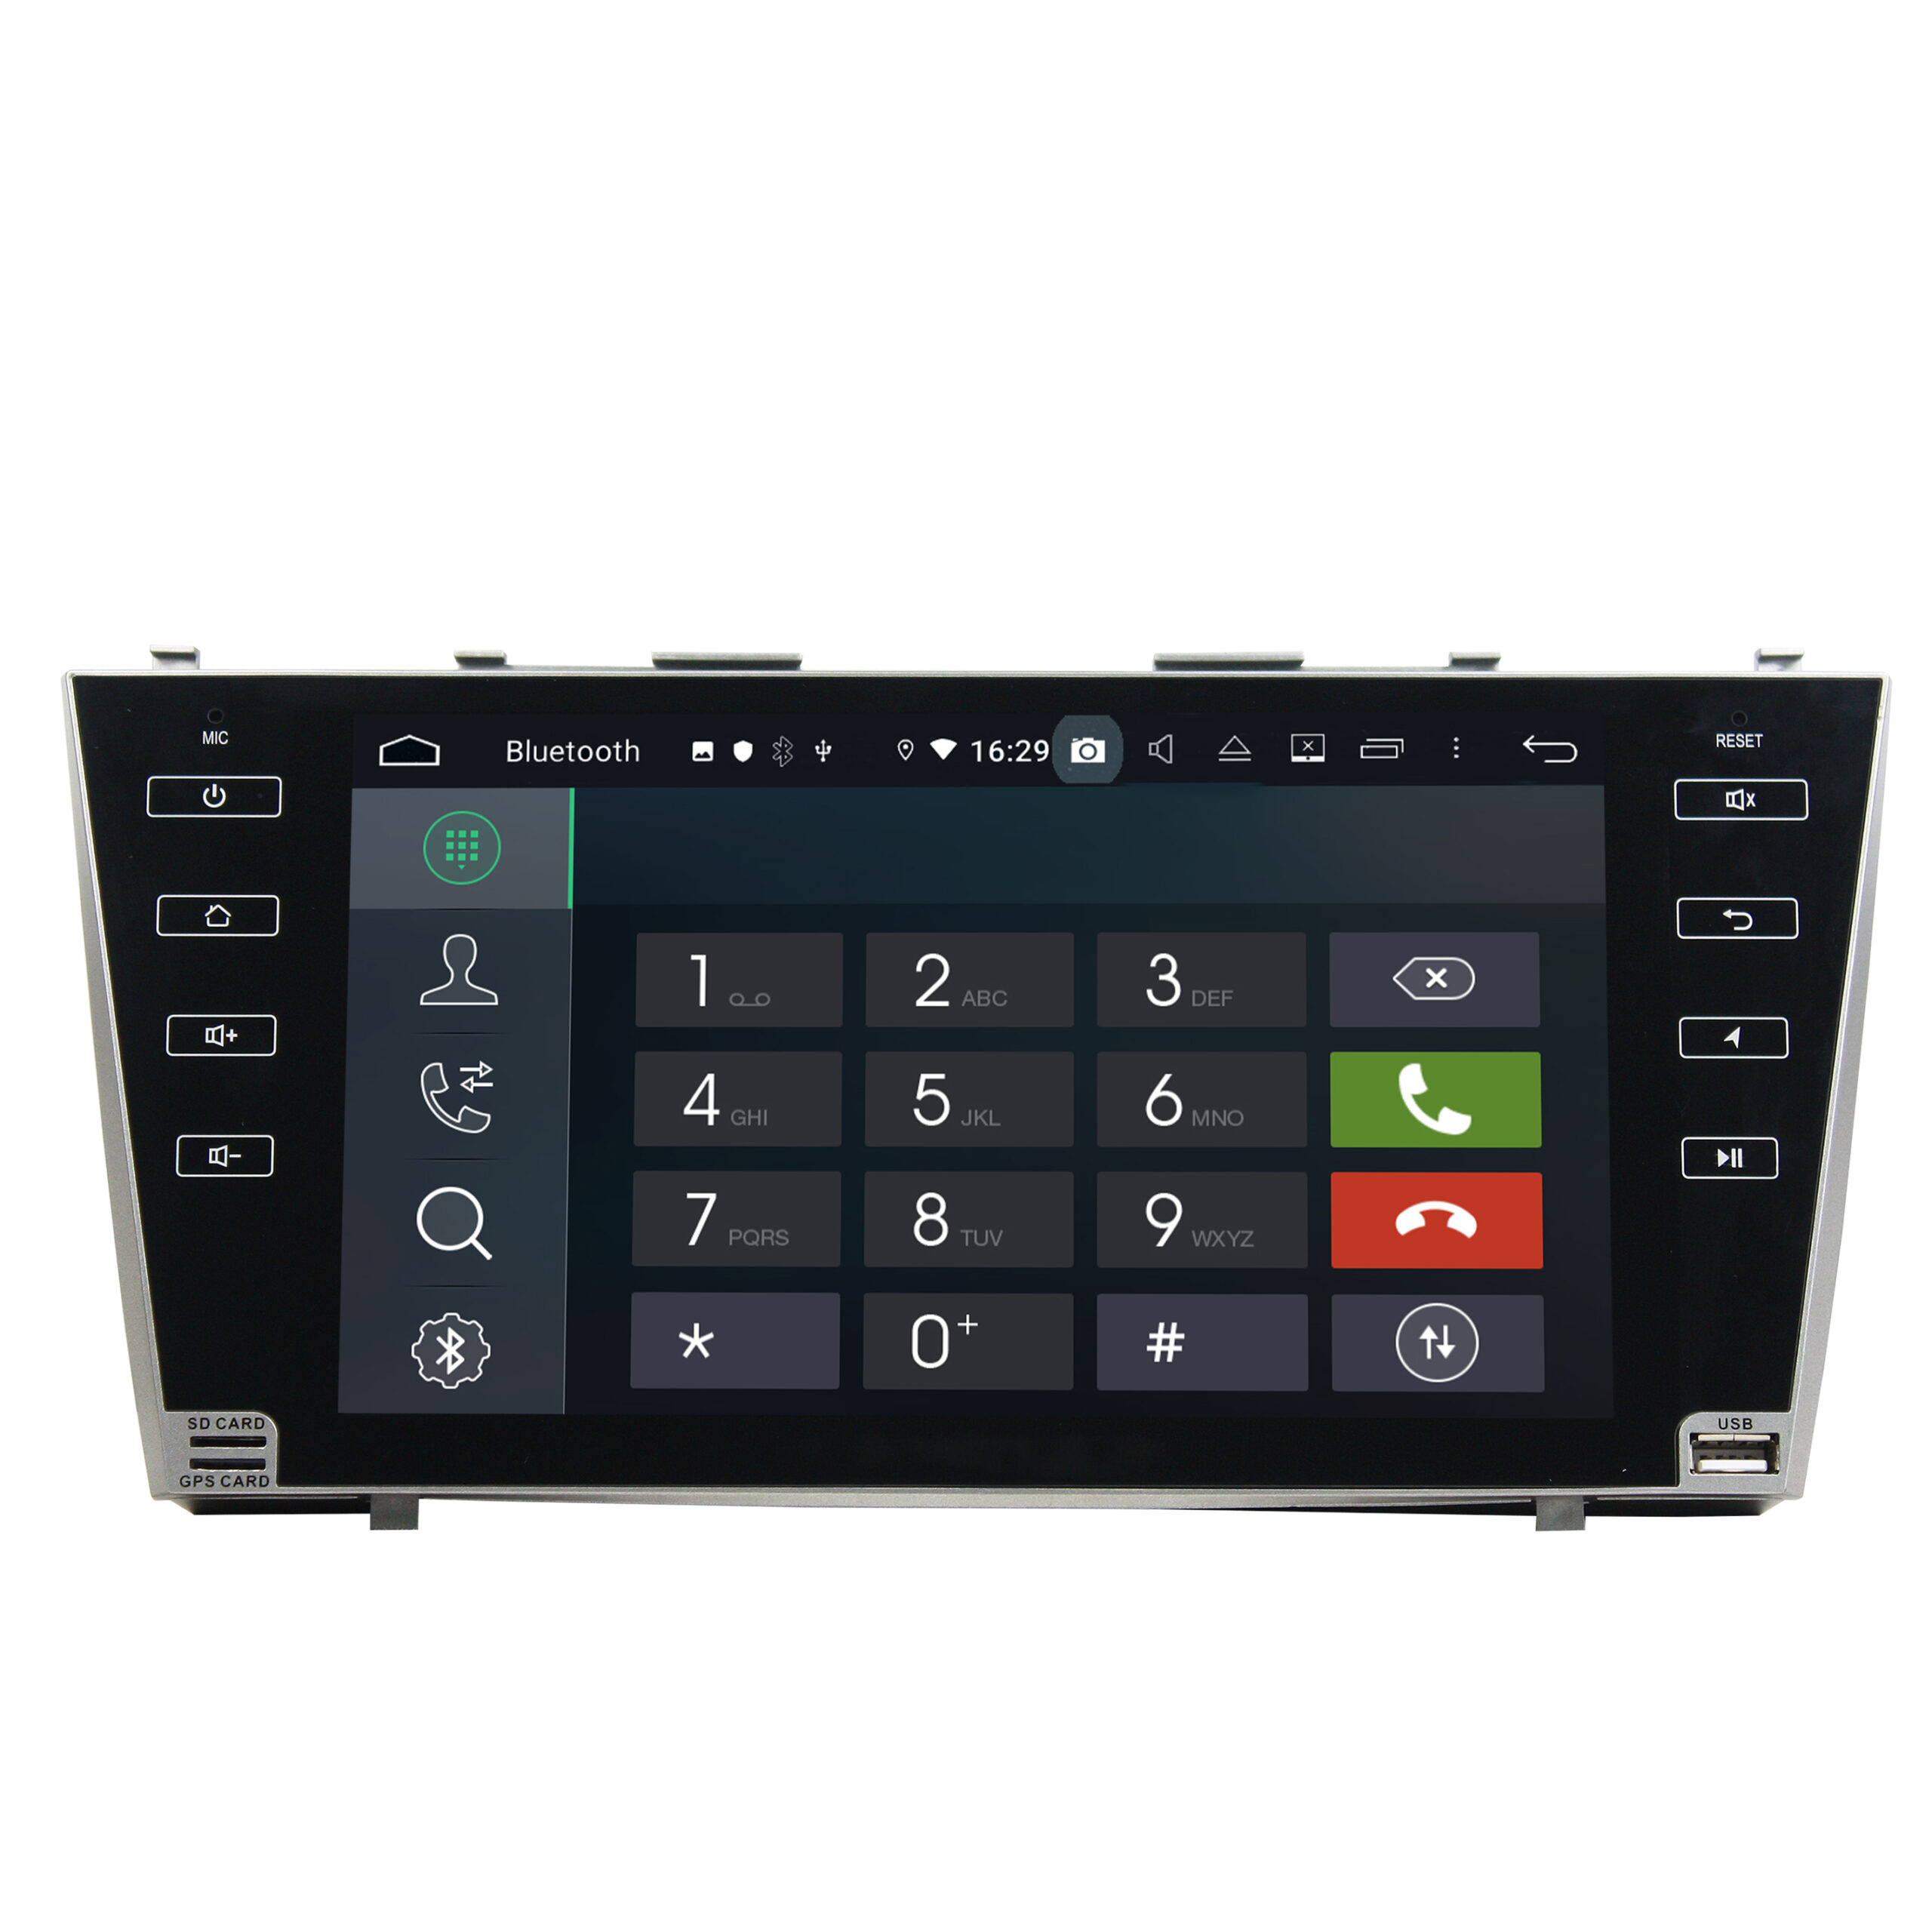 KD-9617 car navigation player stereo receiver for Camry 2007-2011